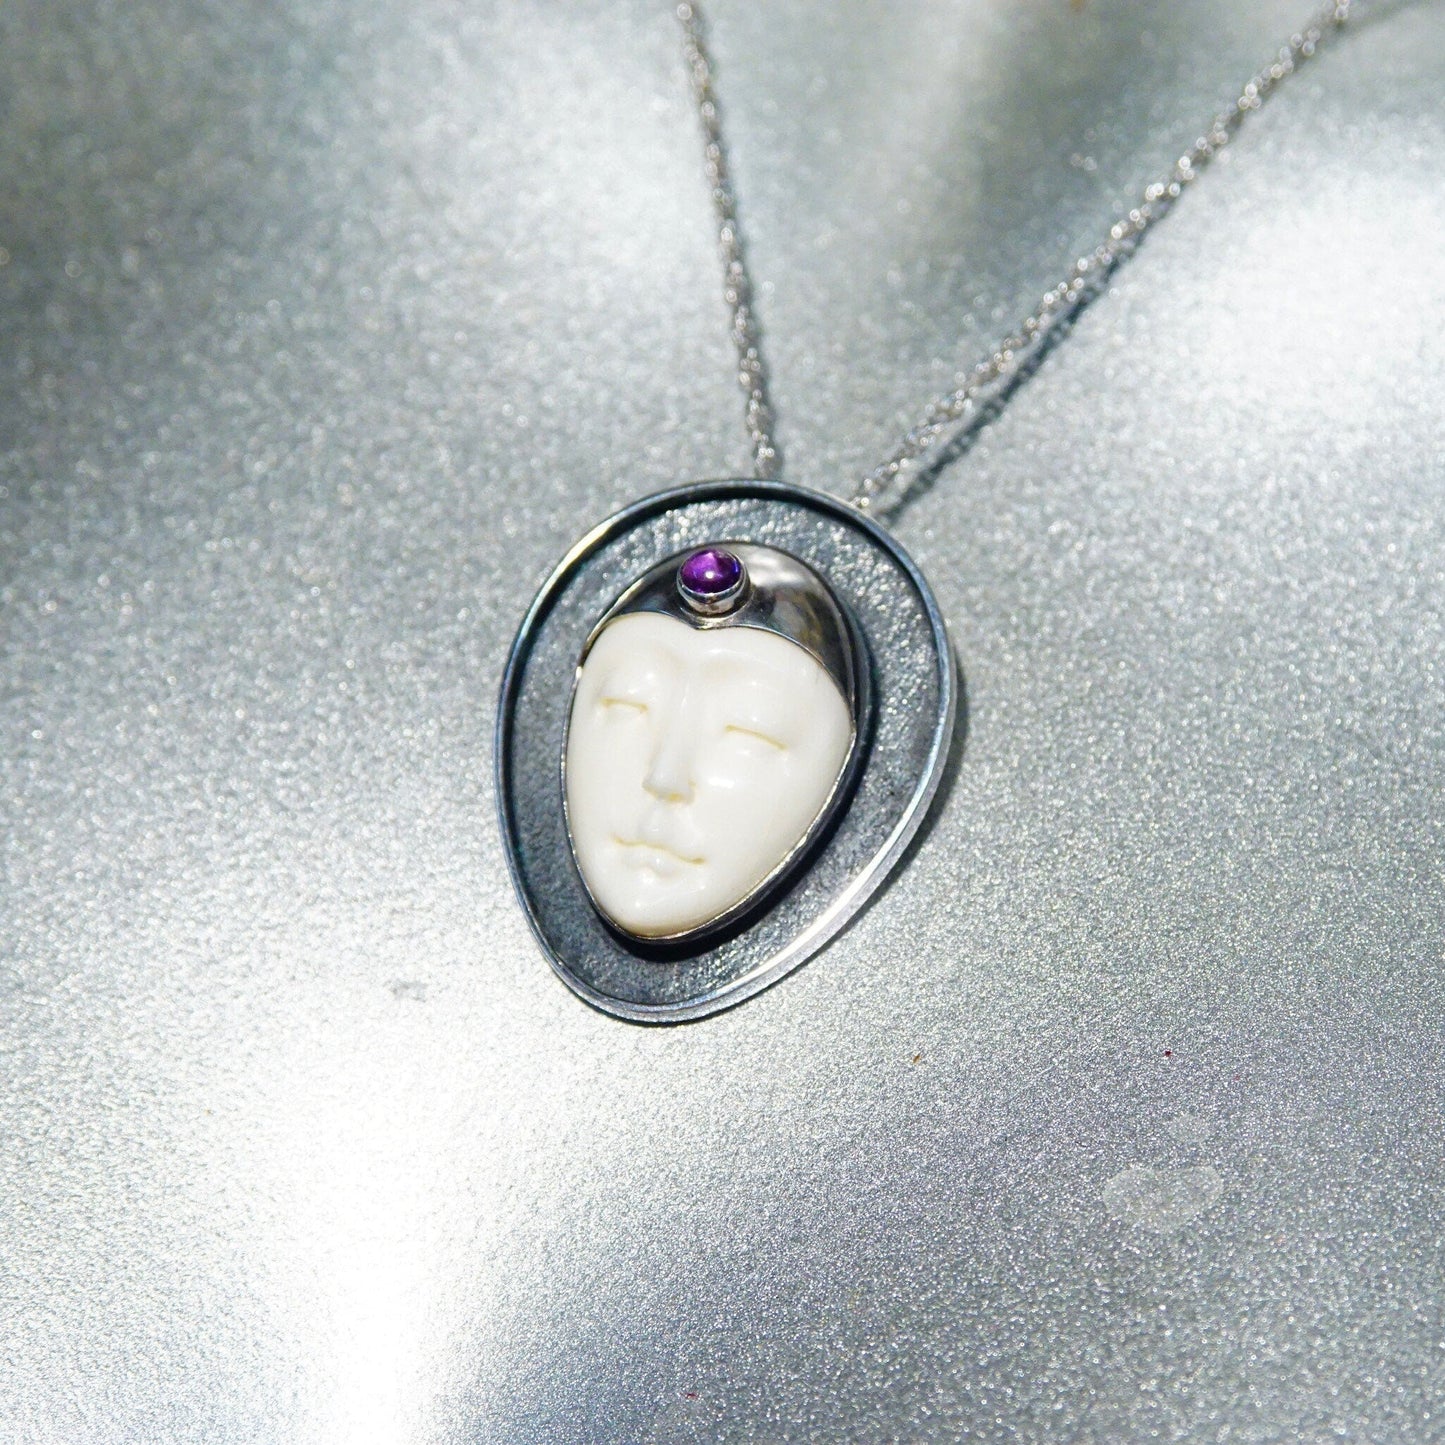 Vintage Sajen sterling silver pendant featuring carved bovine bone in a moon goddess design with amethyst accent, unique extraterrestrial-inspired 925 jewelry on silver chain